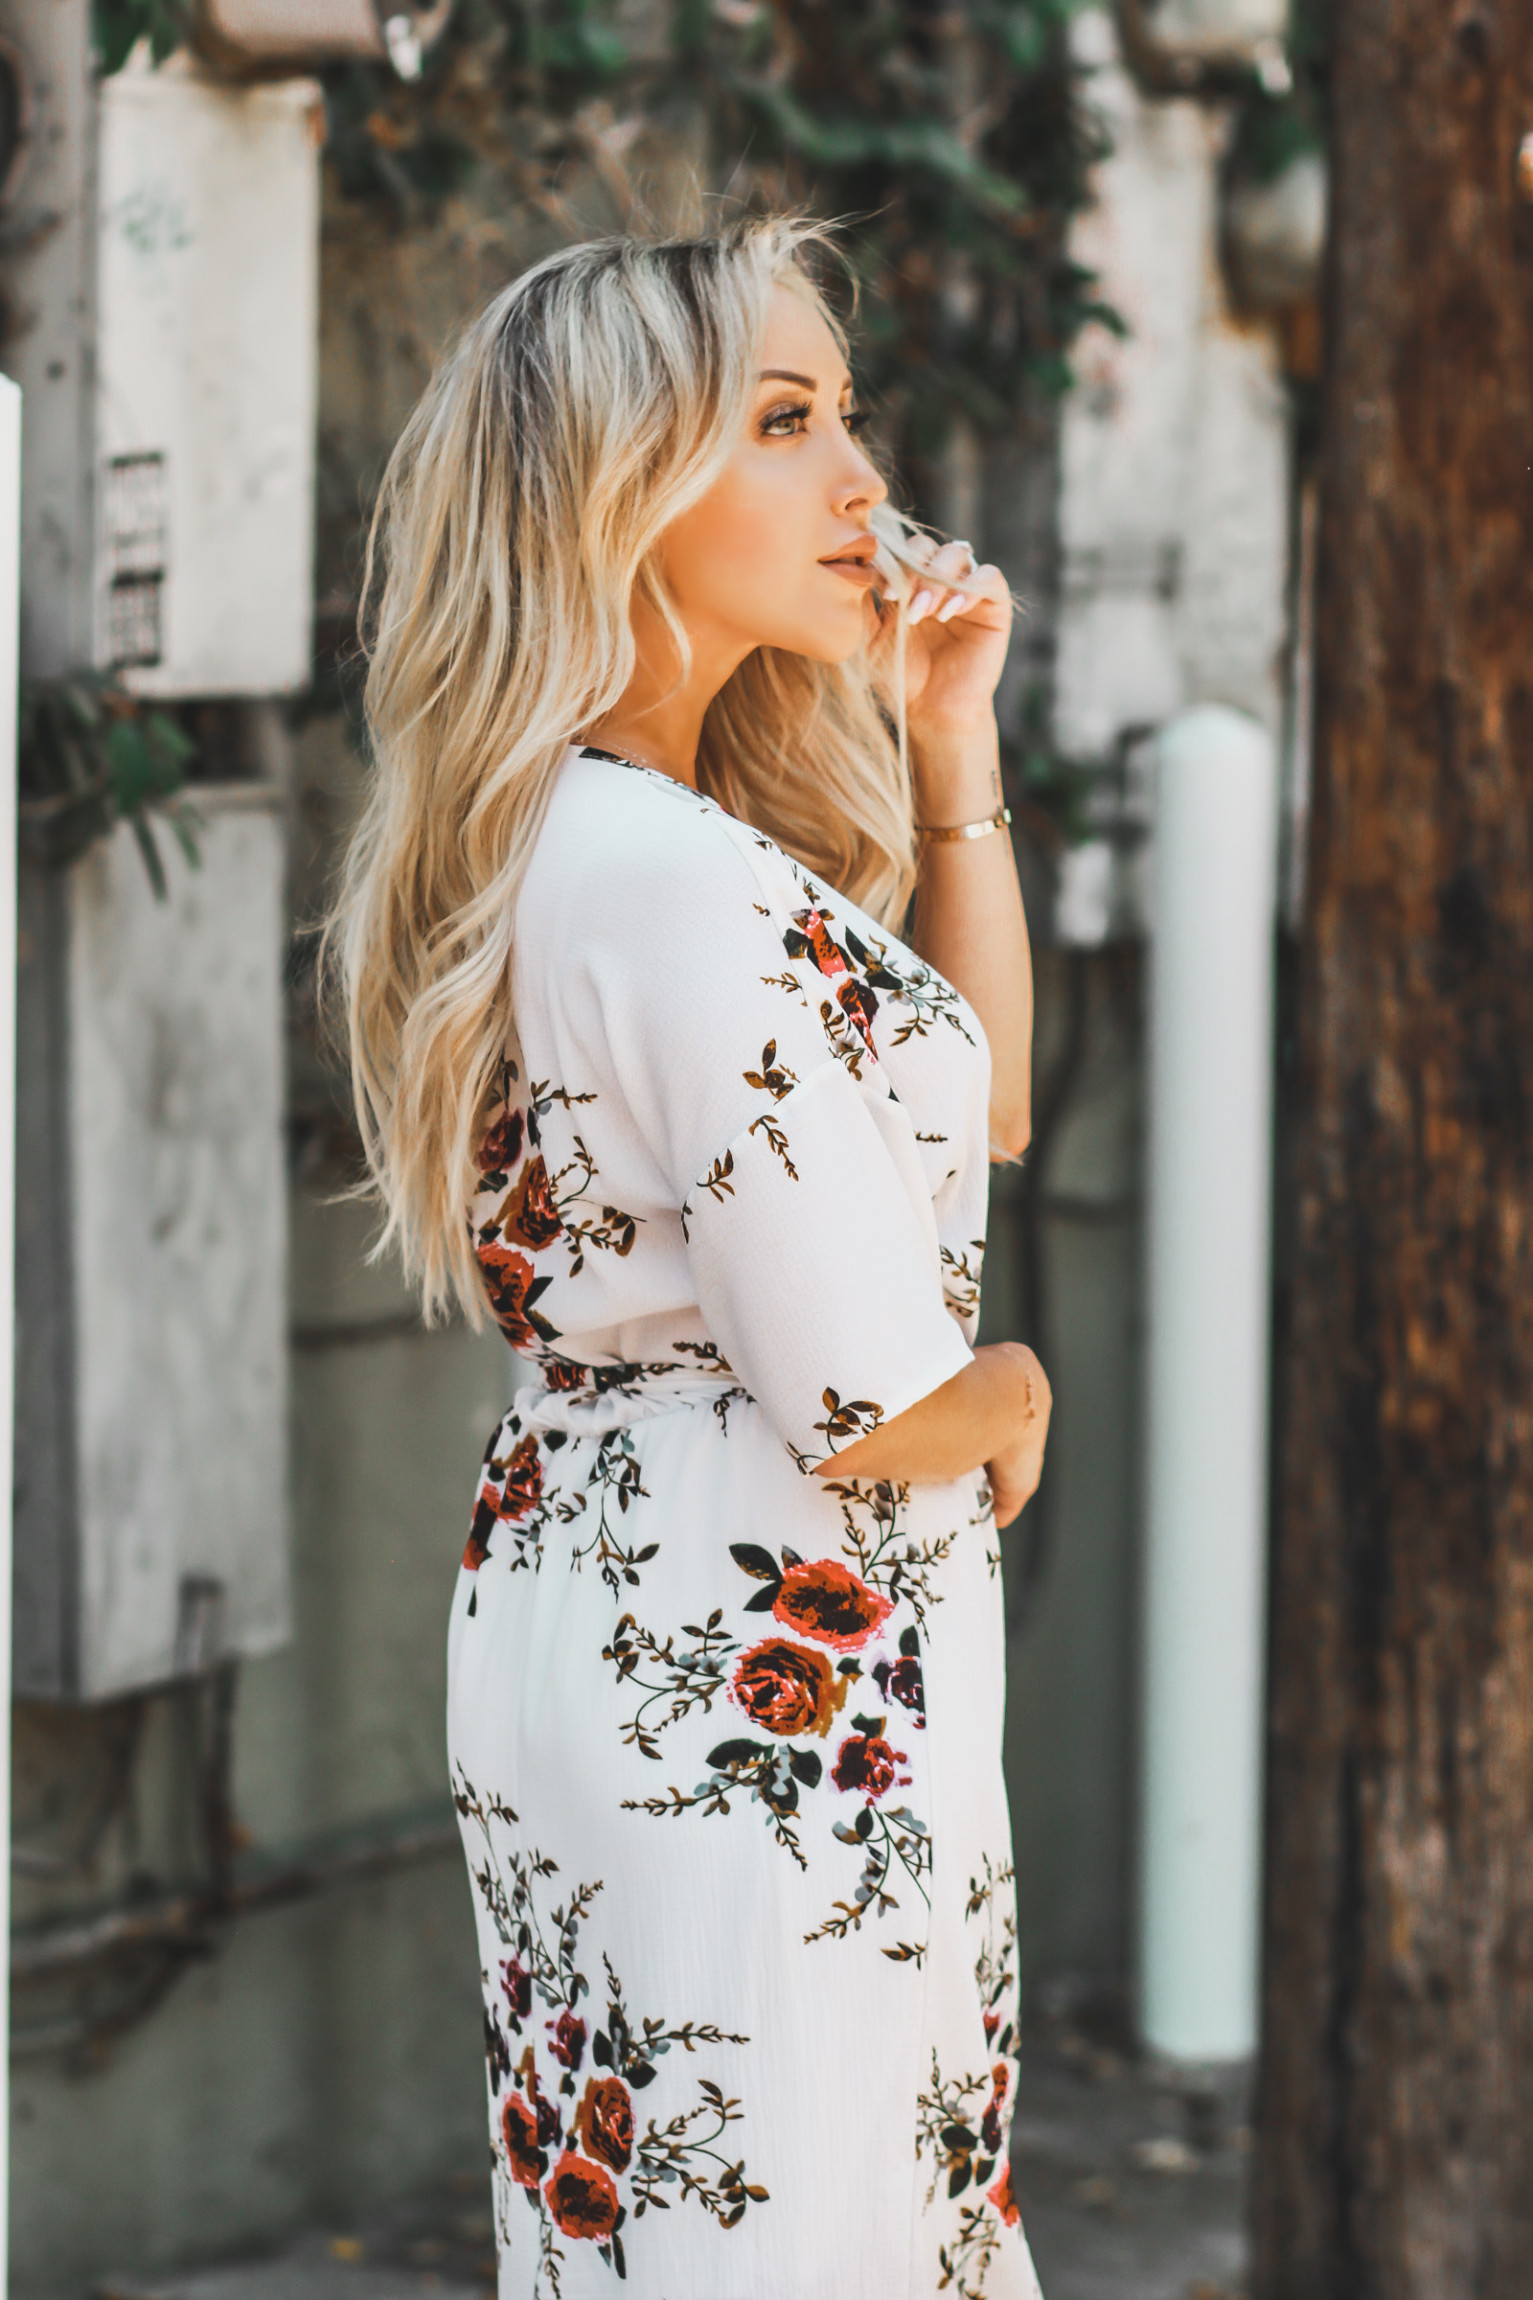 White Floral Dress | Summer Dresses | Summer Style | Blondie in the City by Hayley Larue